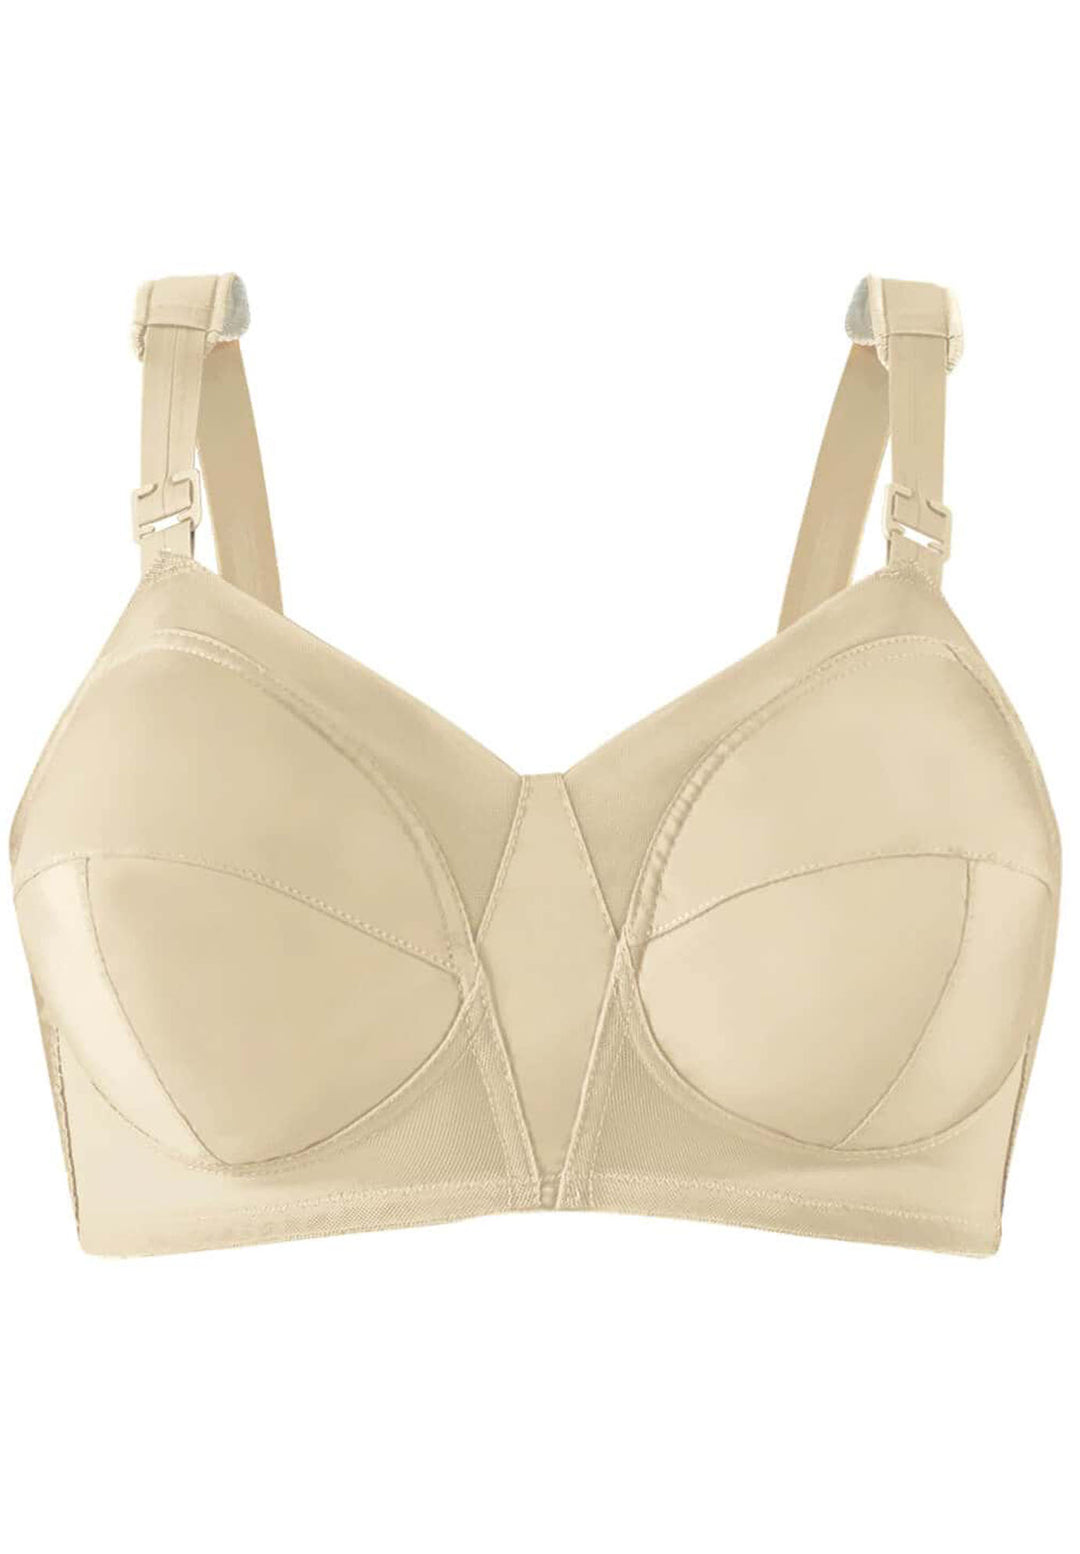 EXQUISITE FORM WHITE ORGINAL FULLY SUPPORT BRA NEW 36B 46D 46DD